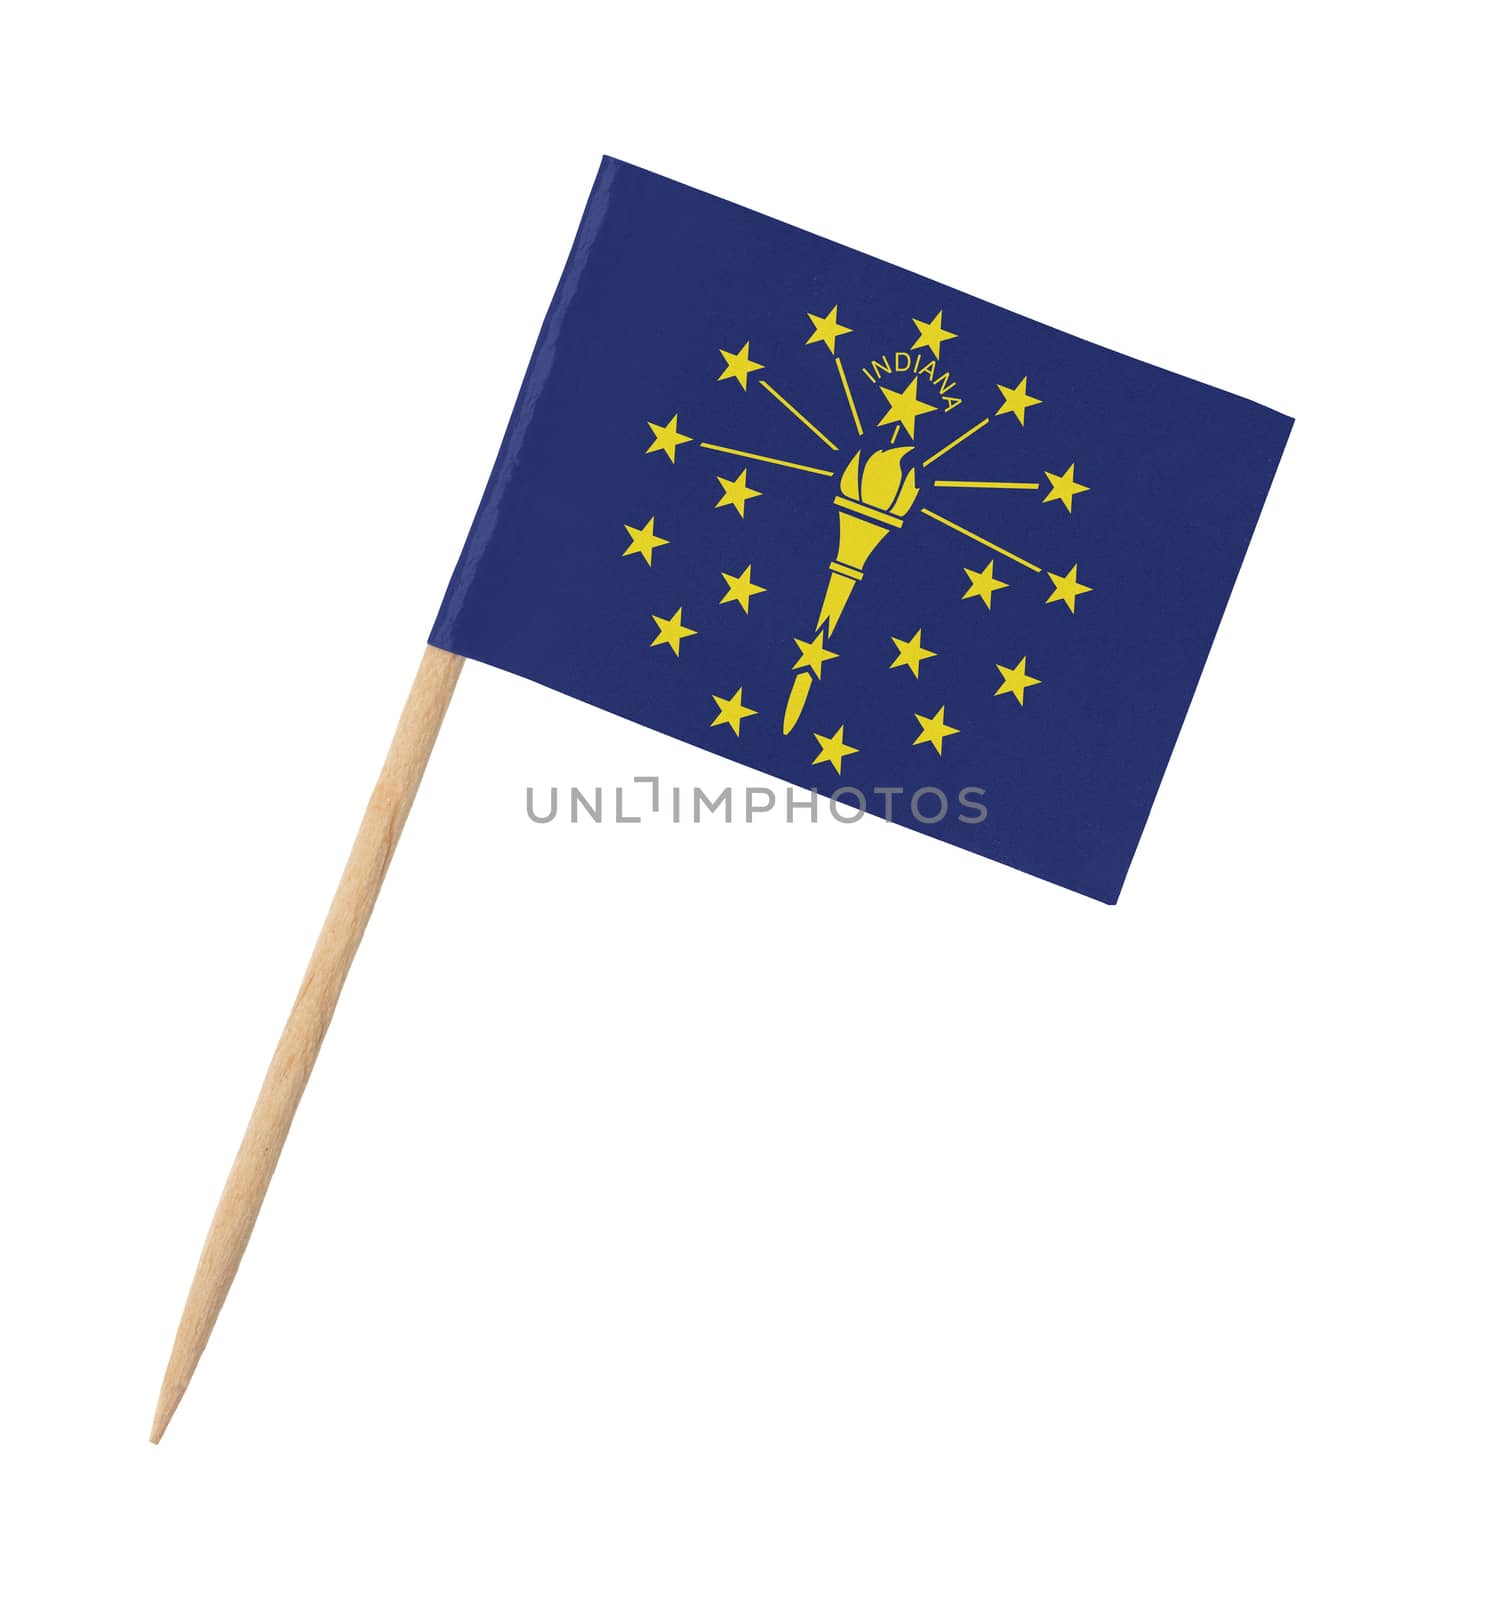 Small paper US-state flag on wooden stick - Indiana by michaklootwijk